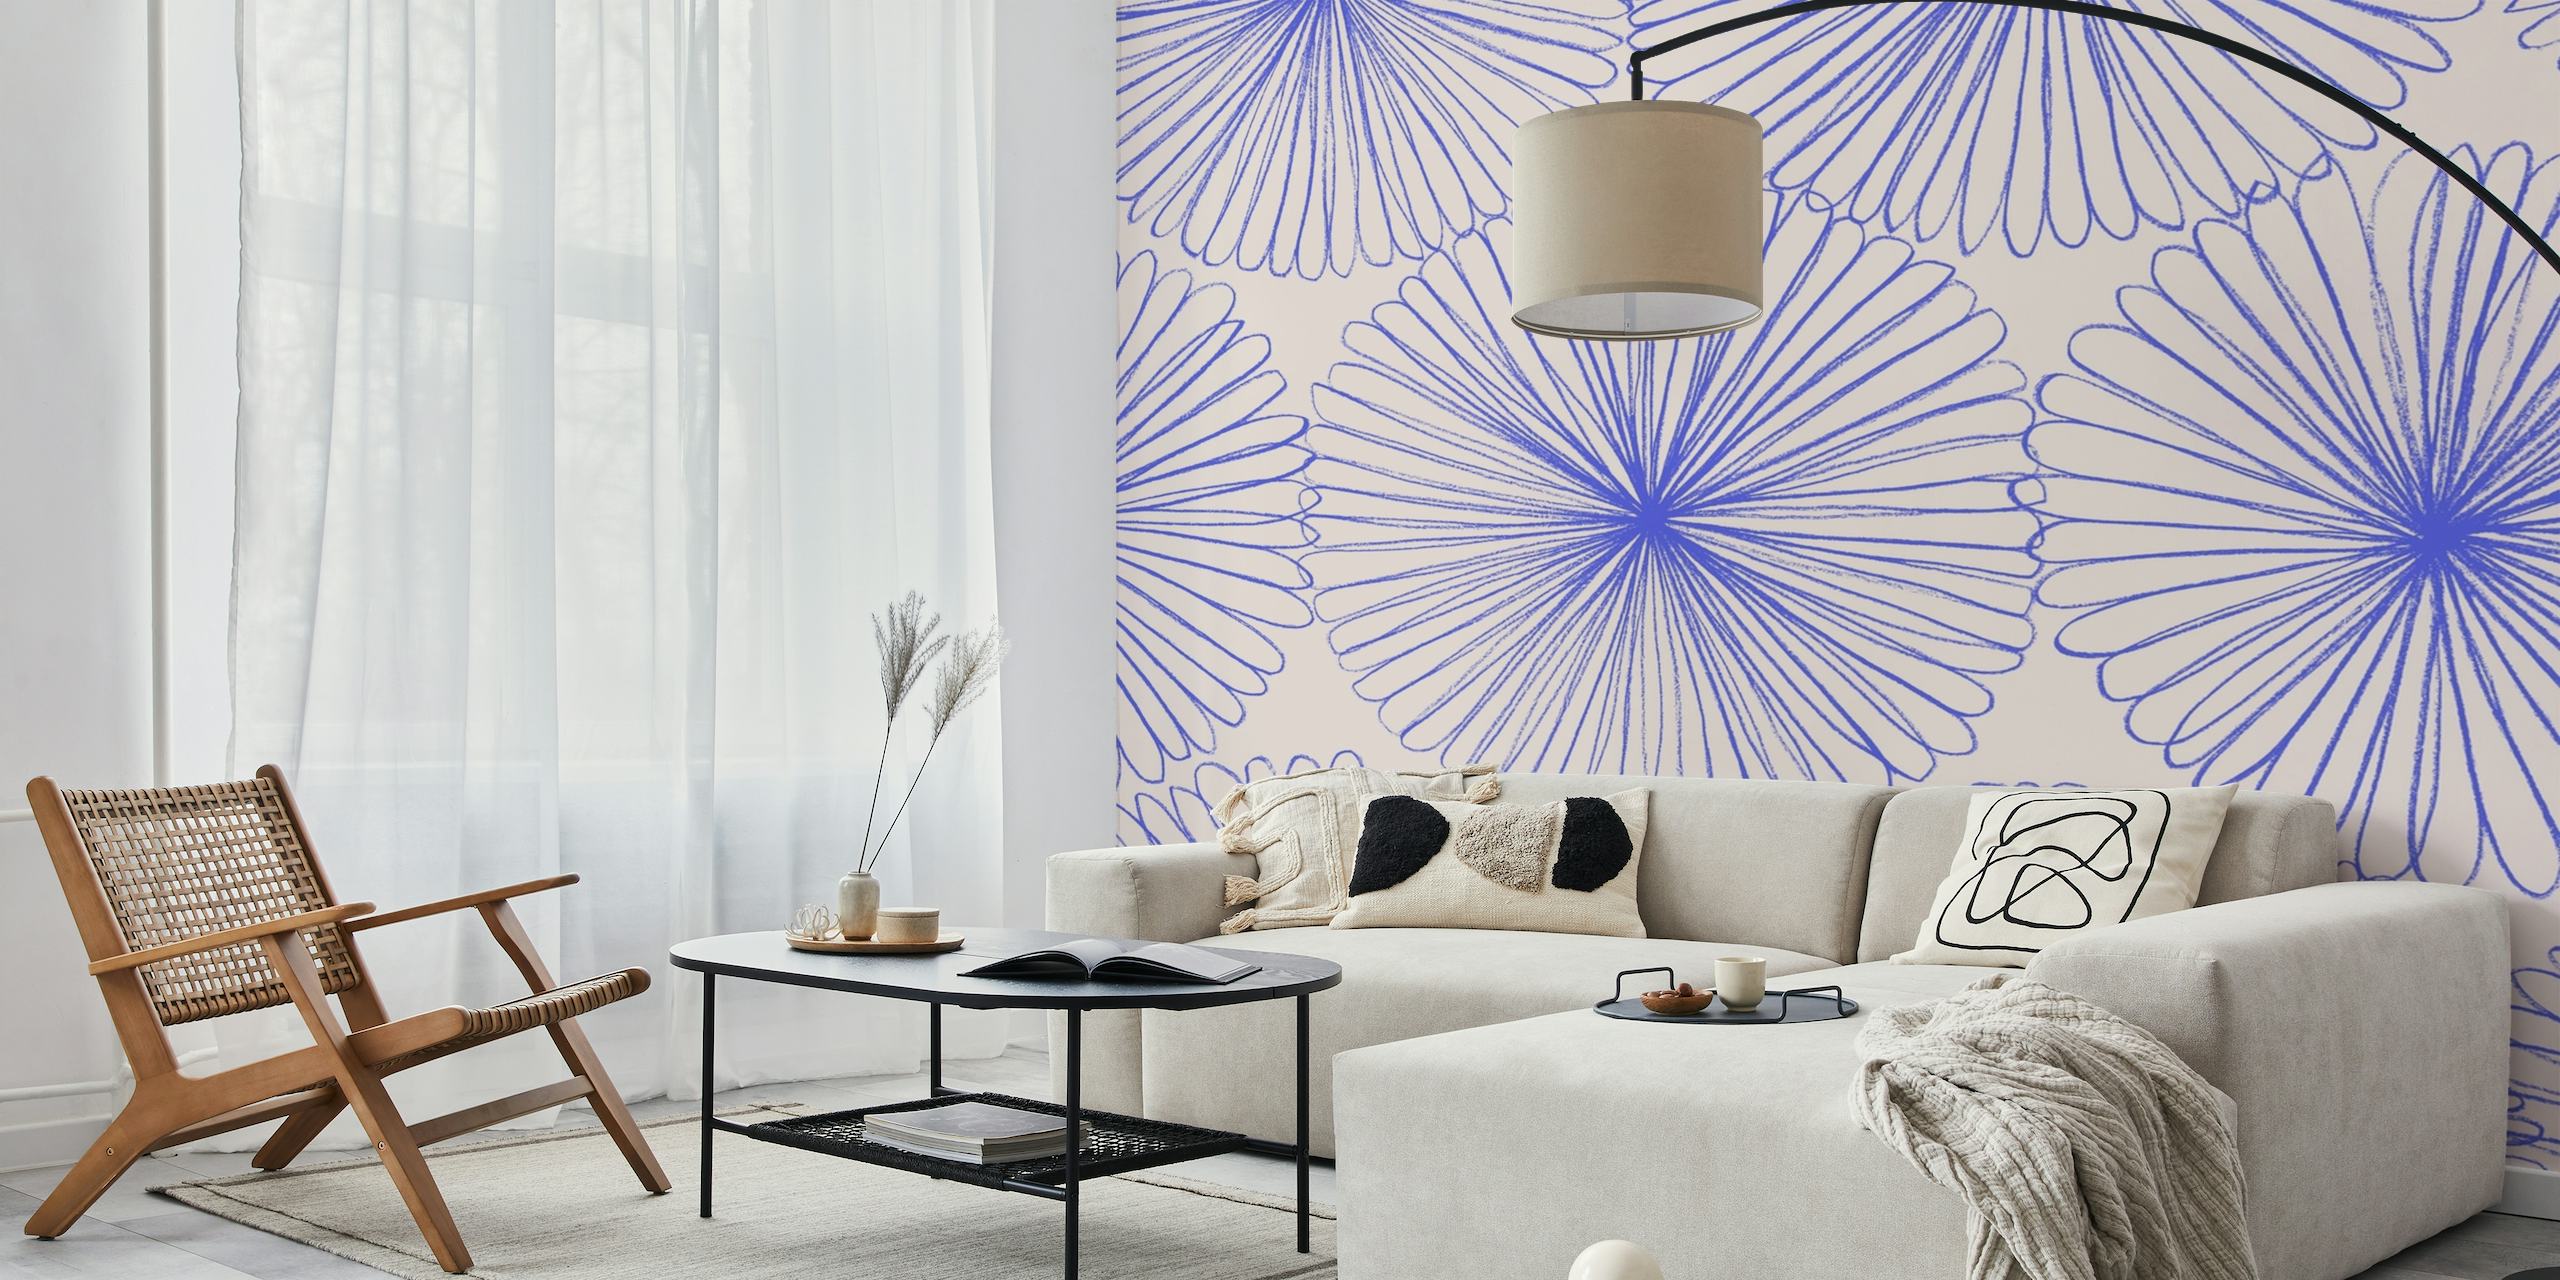 Blue floral pattern wall mural with intricate, wheel-like petals